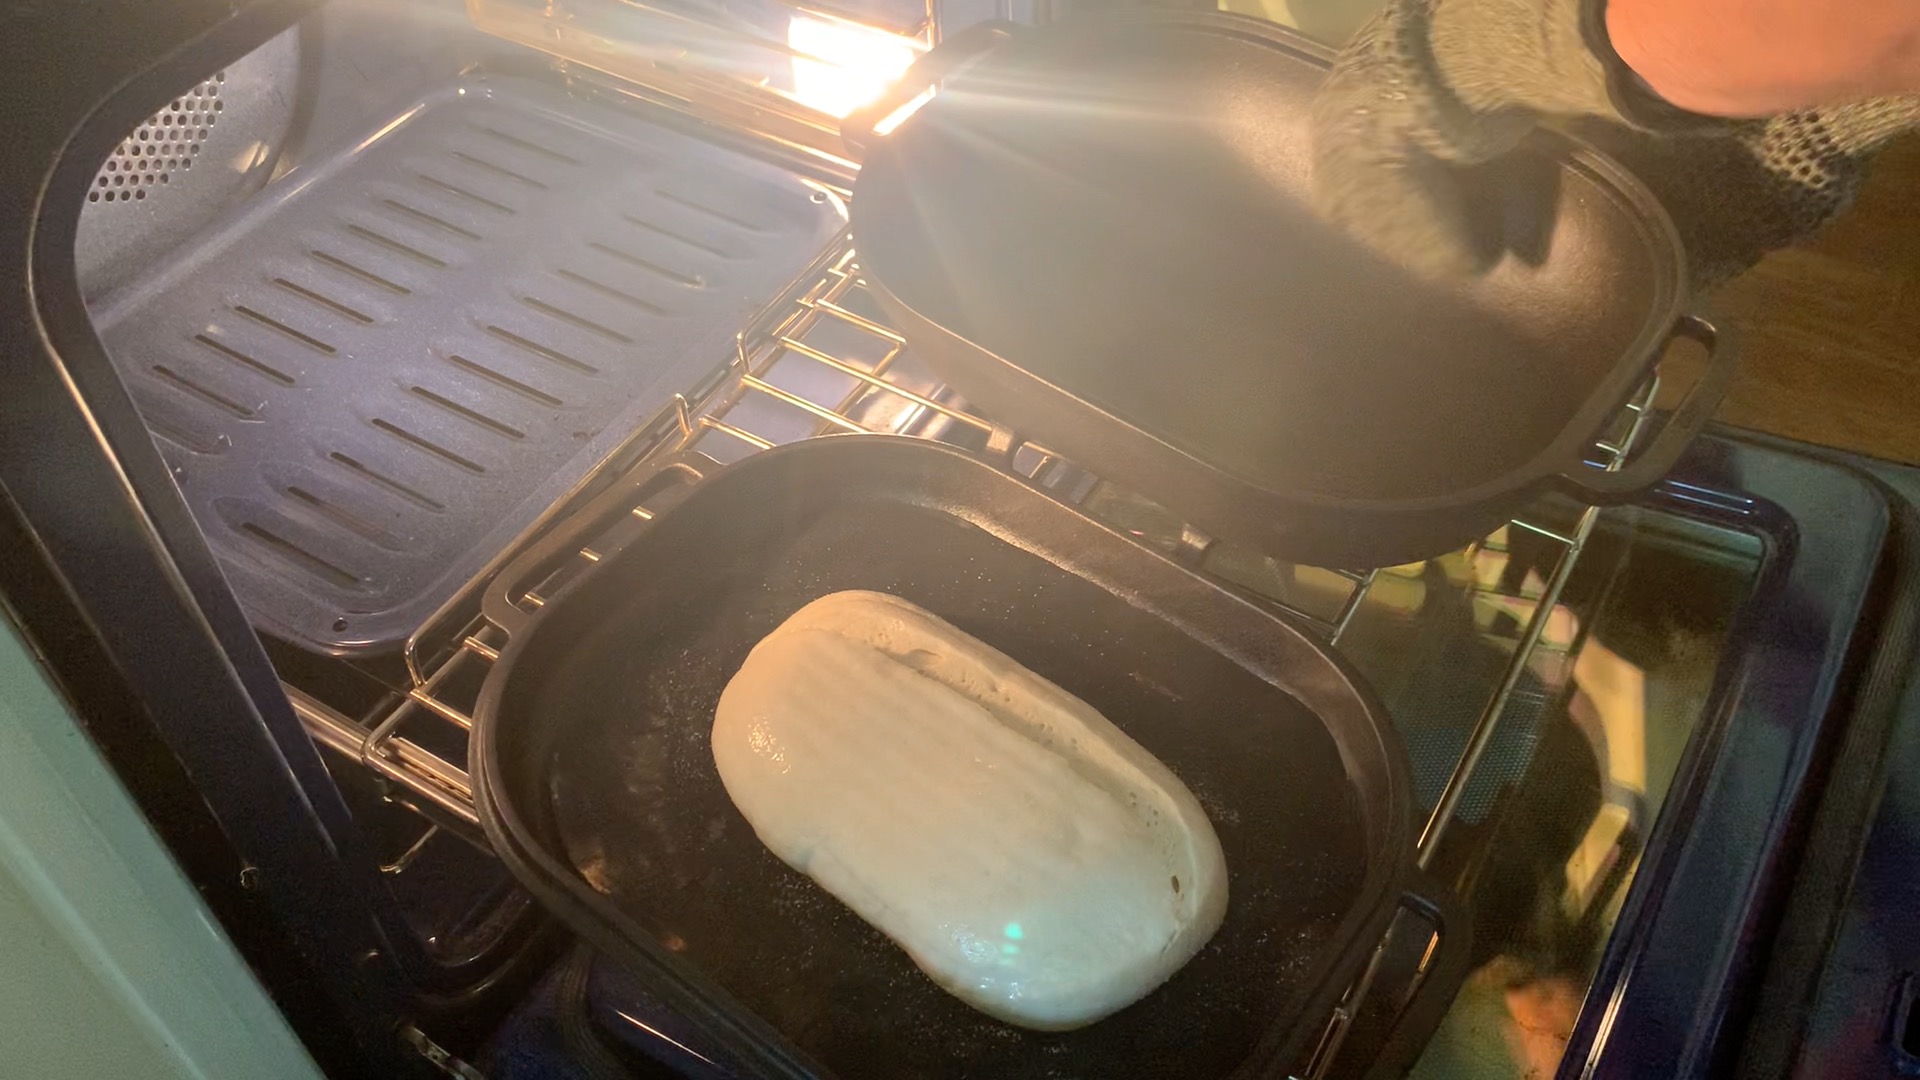 using a Challenger bread pan to bake the sourdough loaf